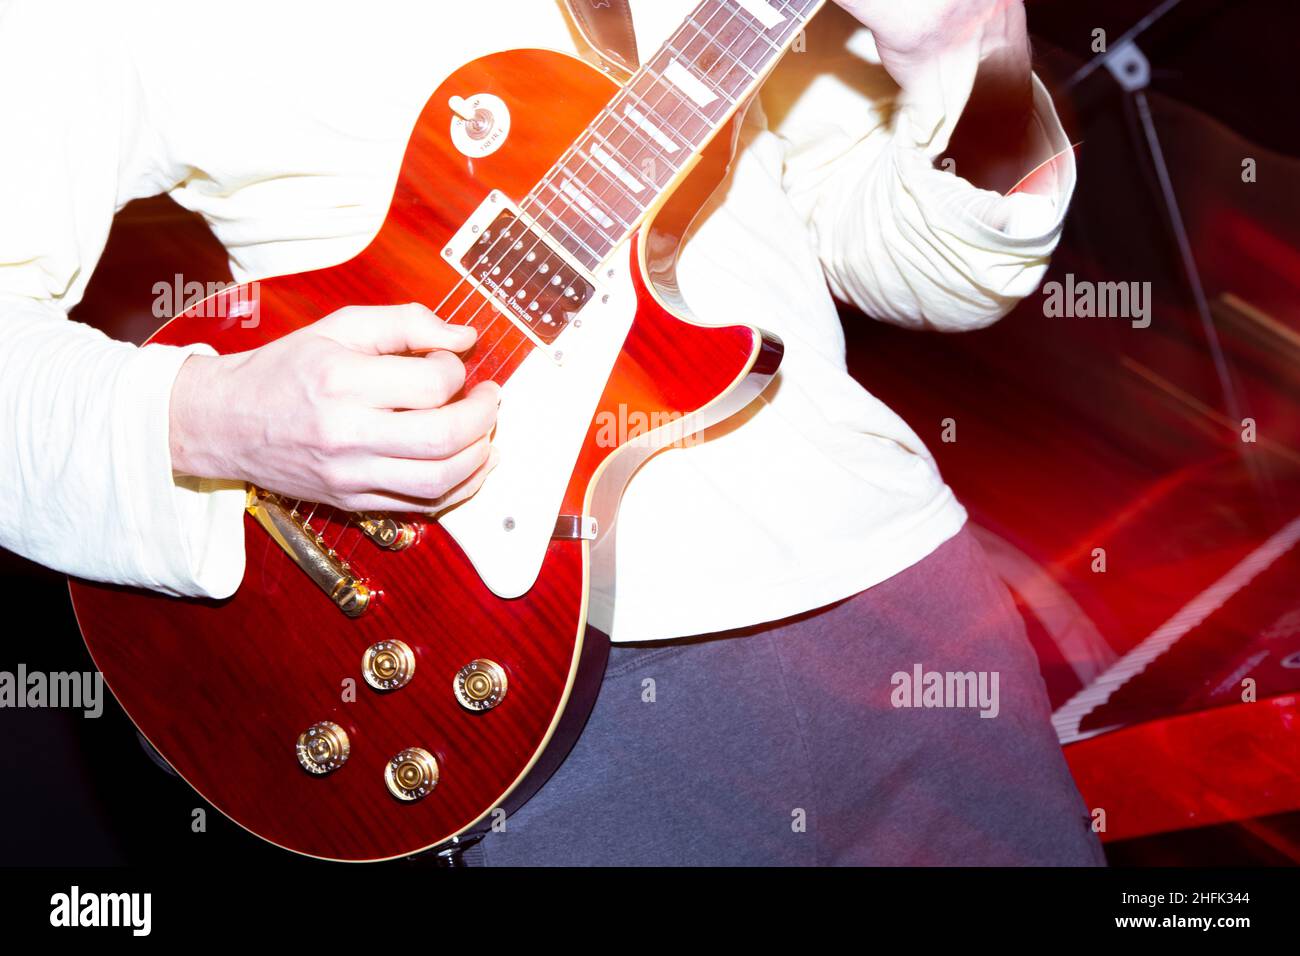 Guitarists playing electric guitars on stage Stock Photo